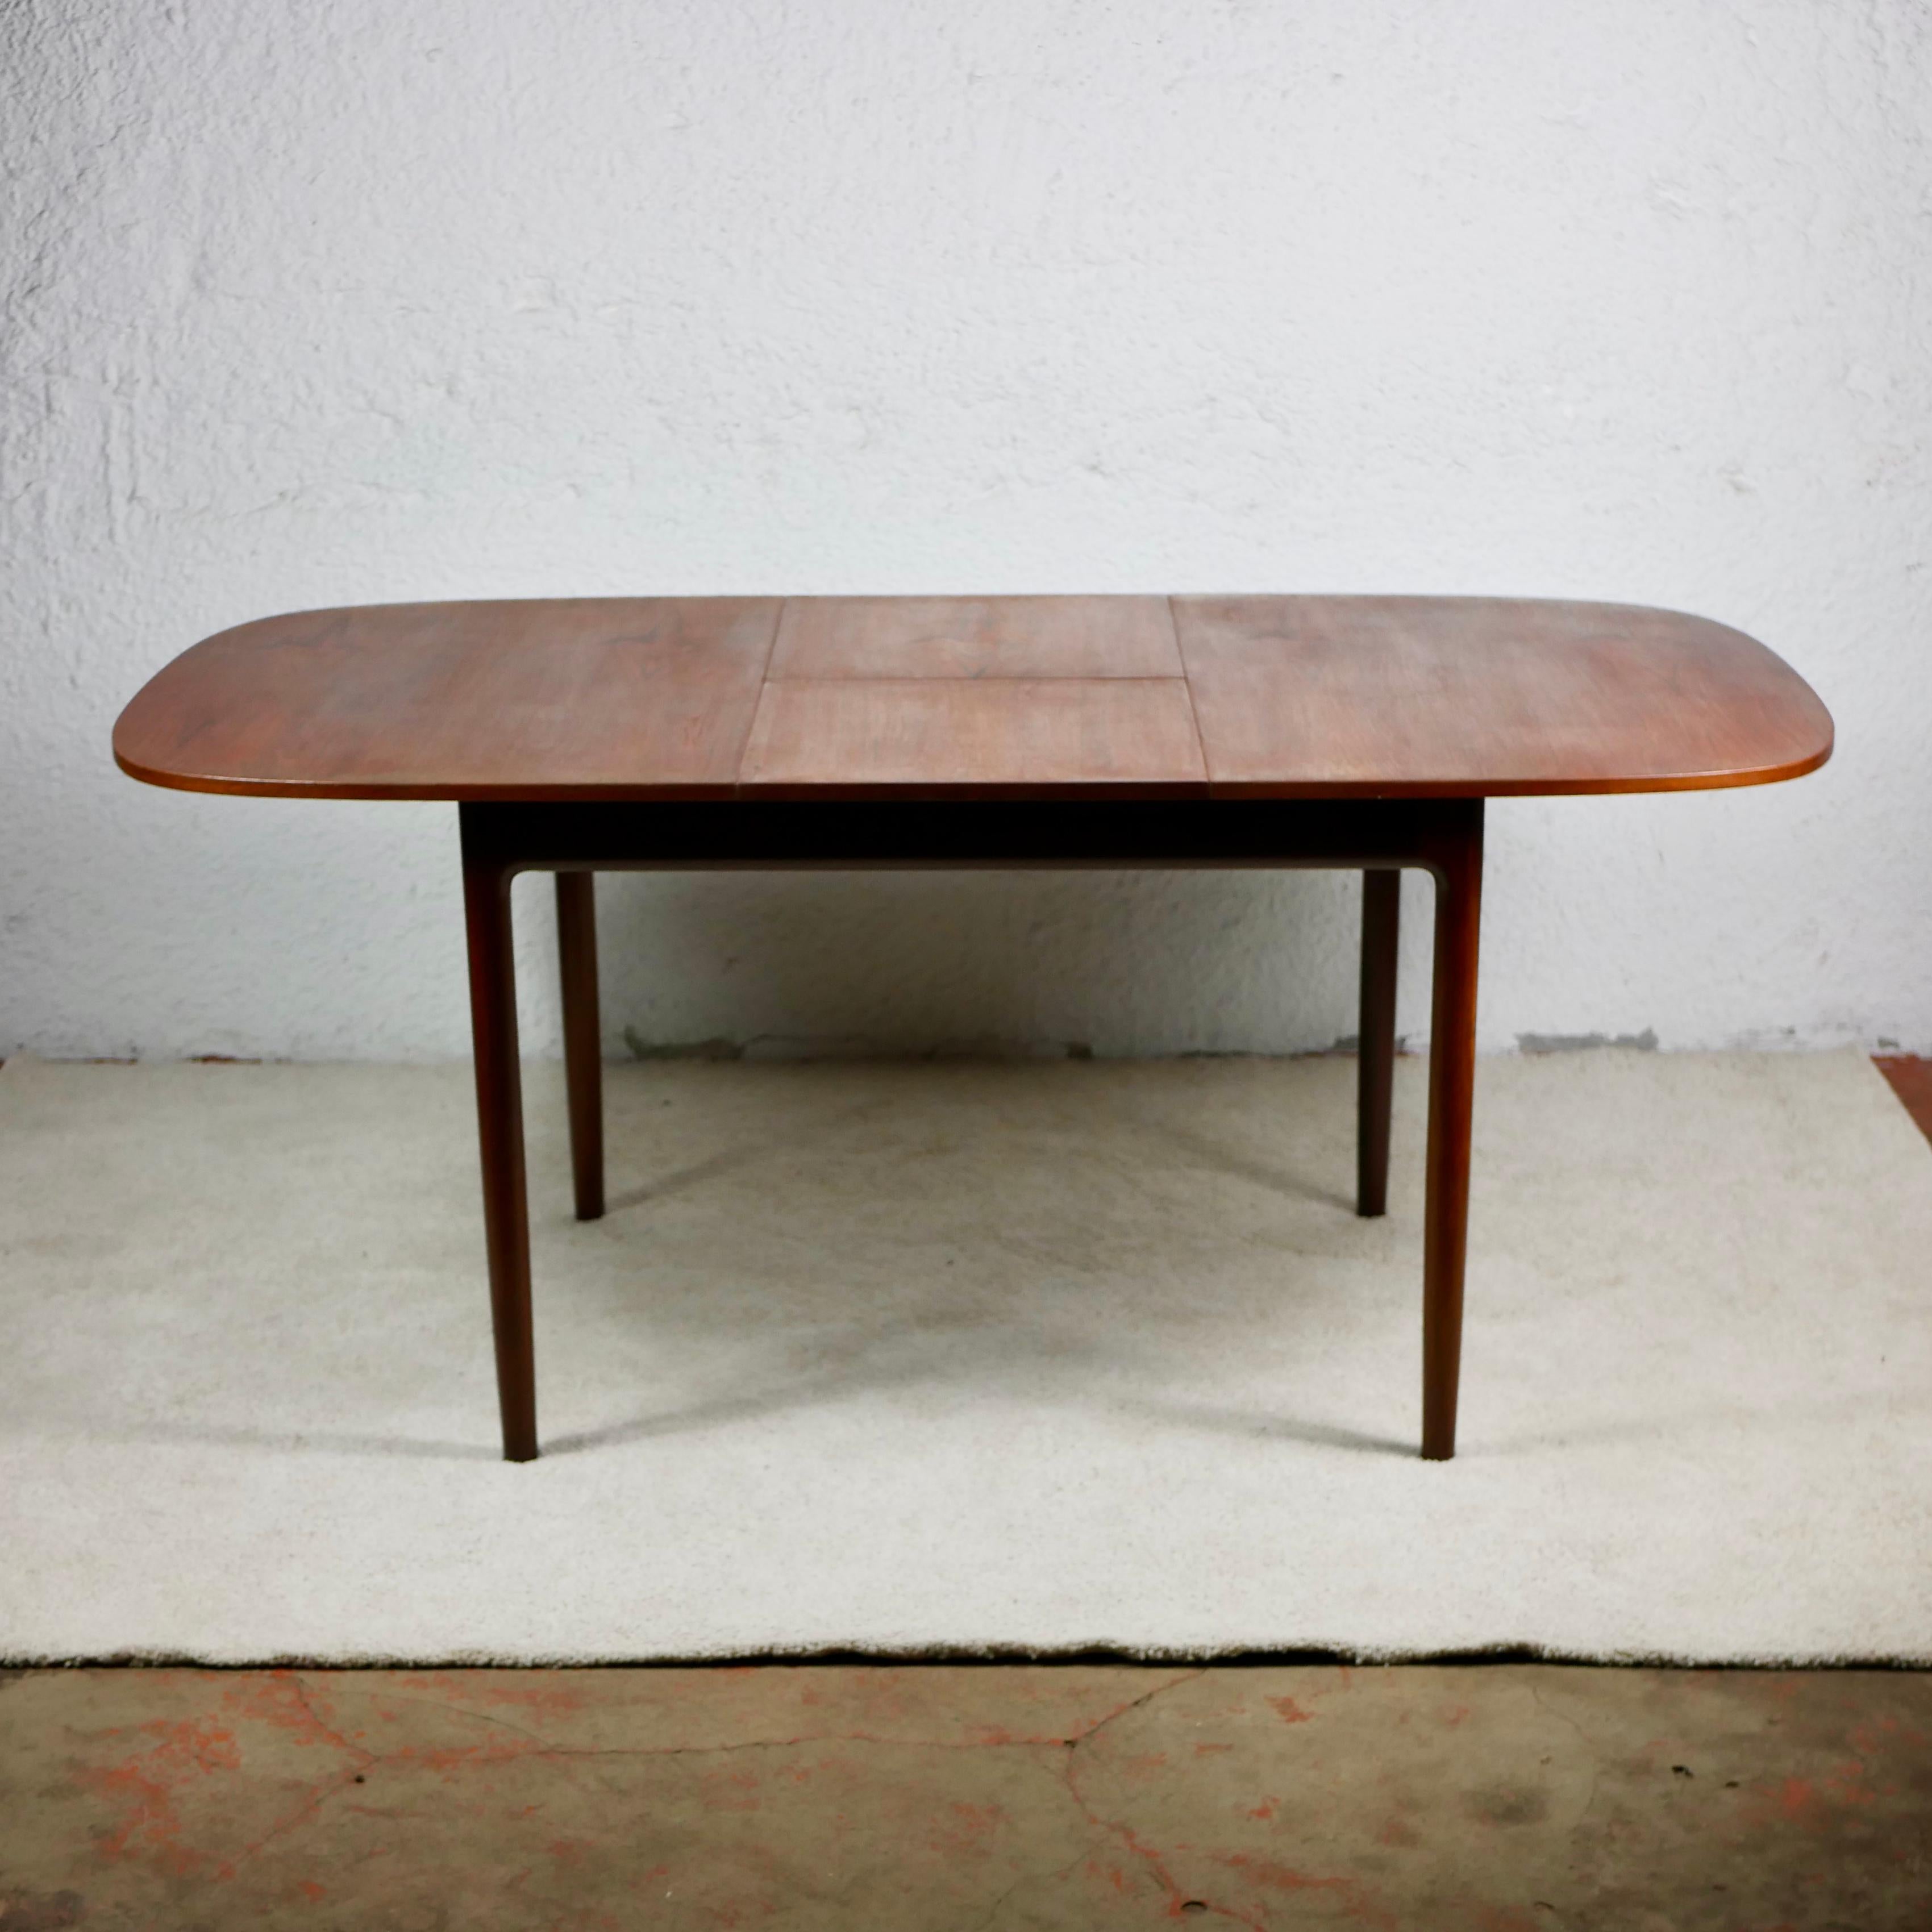 Mid-20th Century Expandable teak dining table by Ib Kofod Larsen for G-plan, 1960s